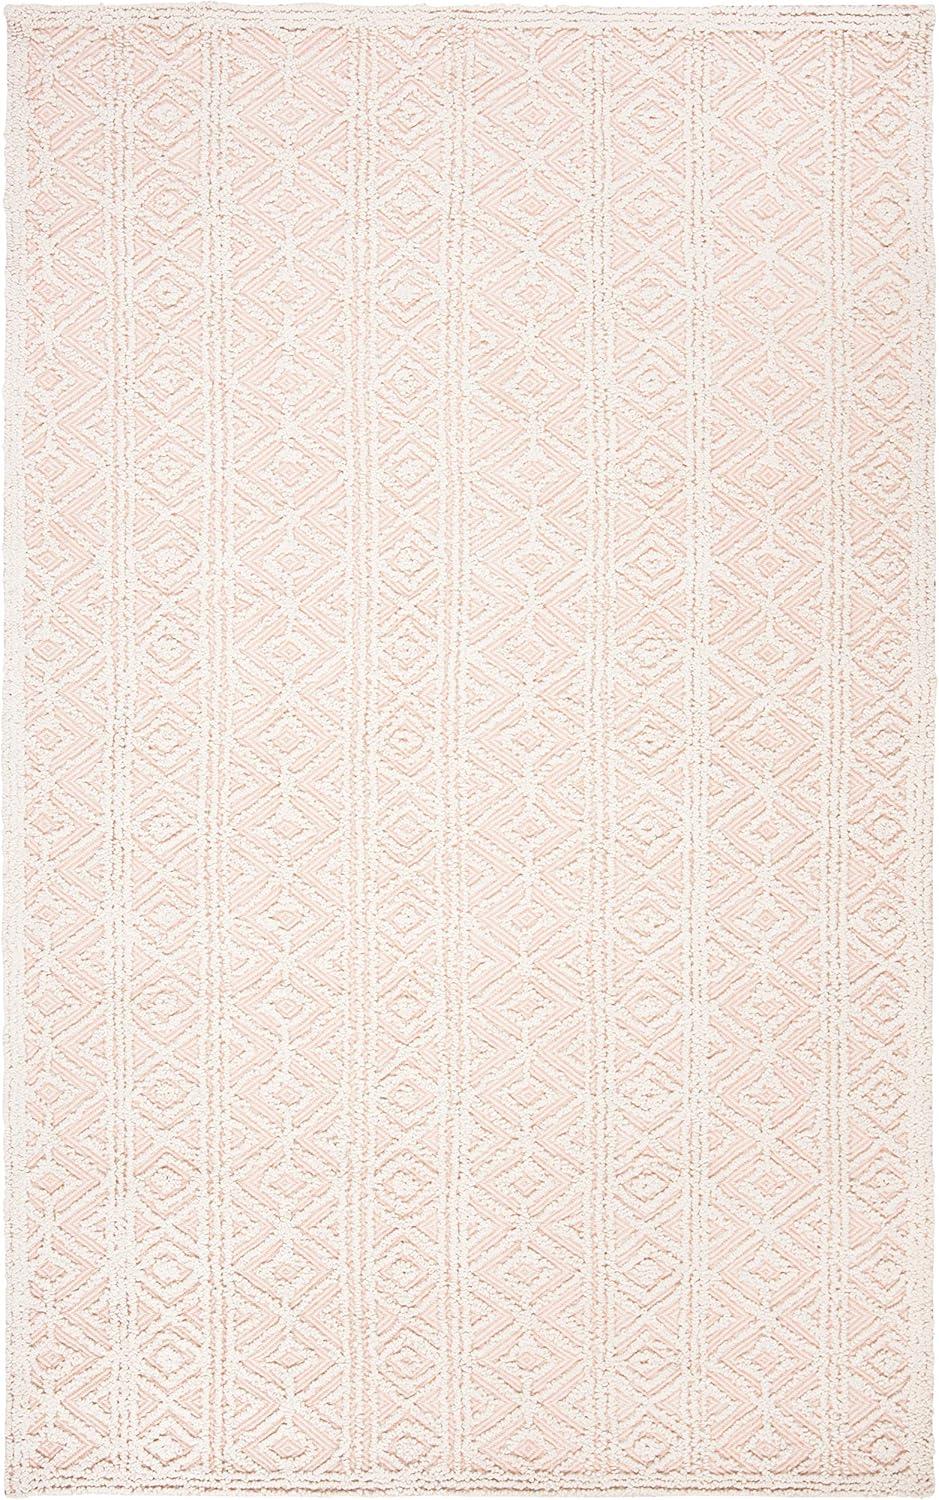 Elegance Trace 8' x 10' Hand-Tufted Wool & Viscose Beige and Pink Rug